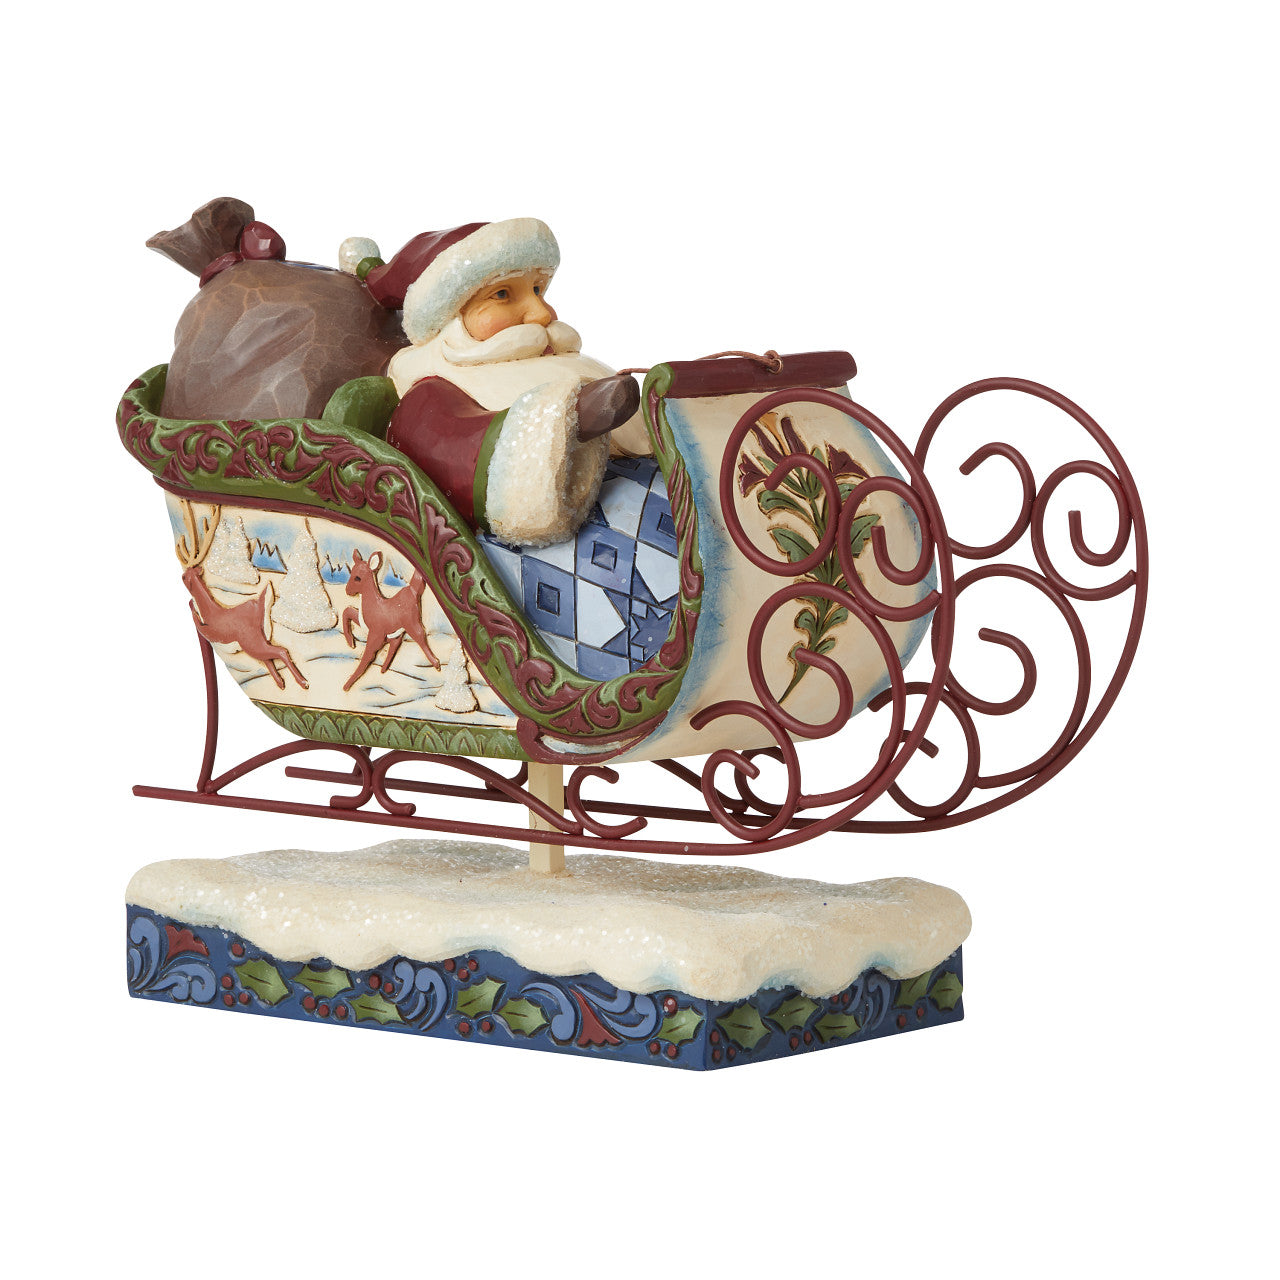 Jim Shore Victorian Christmas Santa in Sleigh Figurine  "Flight of Festive Fancy" Cozy in his sleigh, Santa steers from the comfort of a blanket while his cargo of presents rests behind him. Levitating above the snow with the help of reindeer and magic, this Jim Shore Santa delights and mystifies all season long.